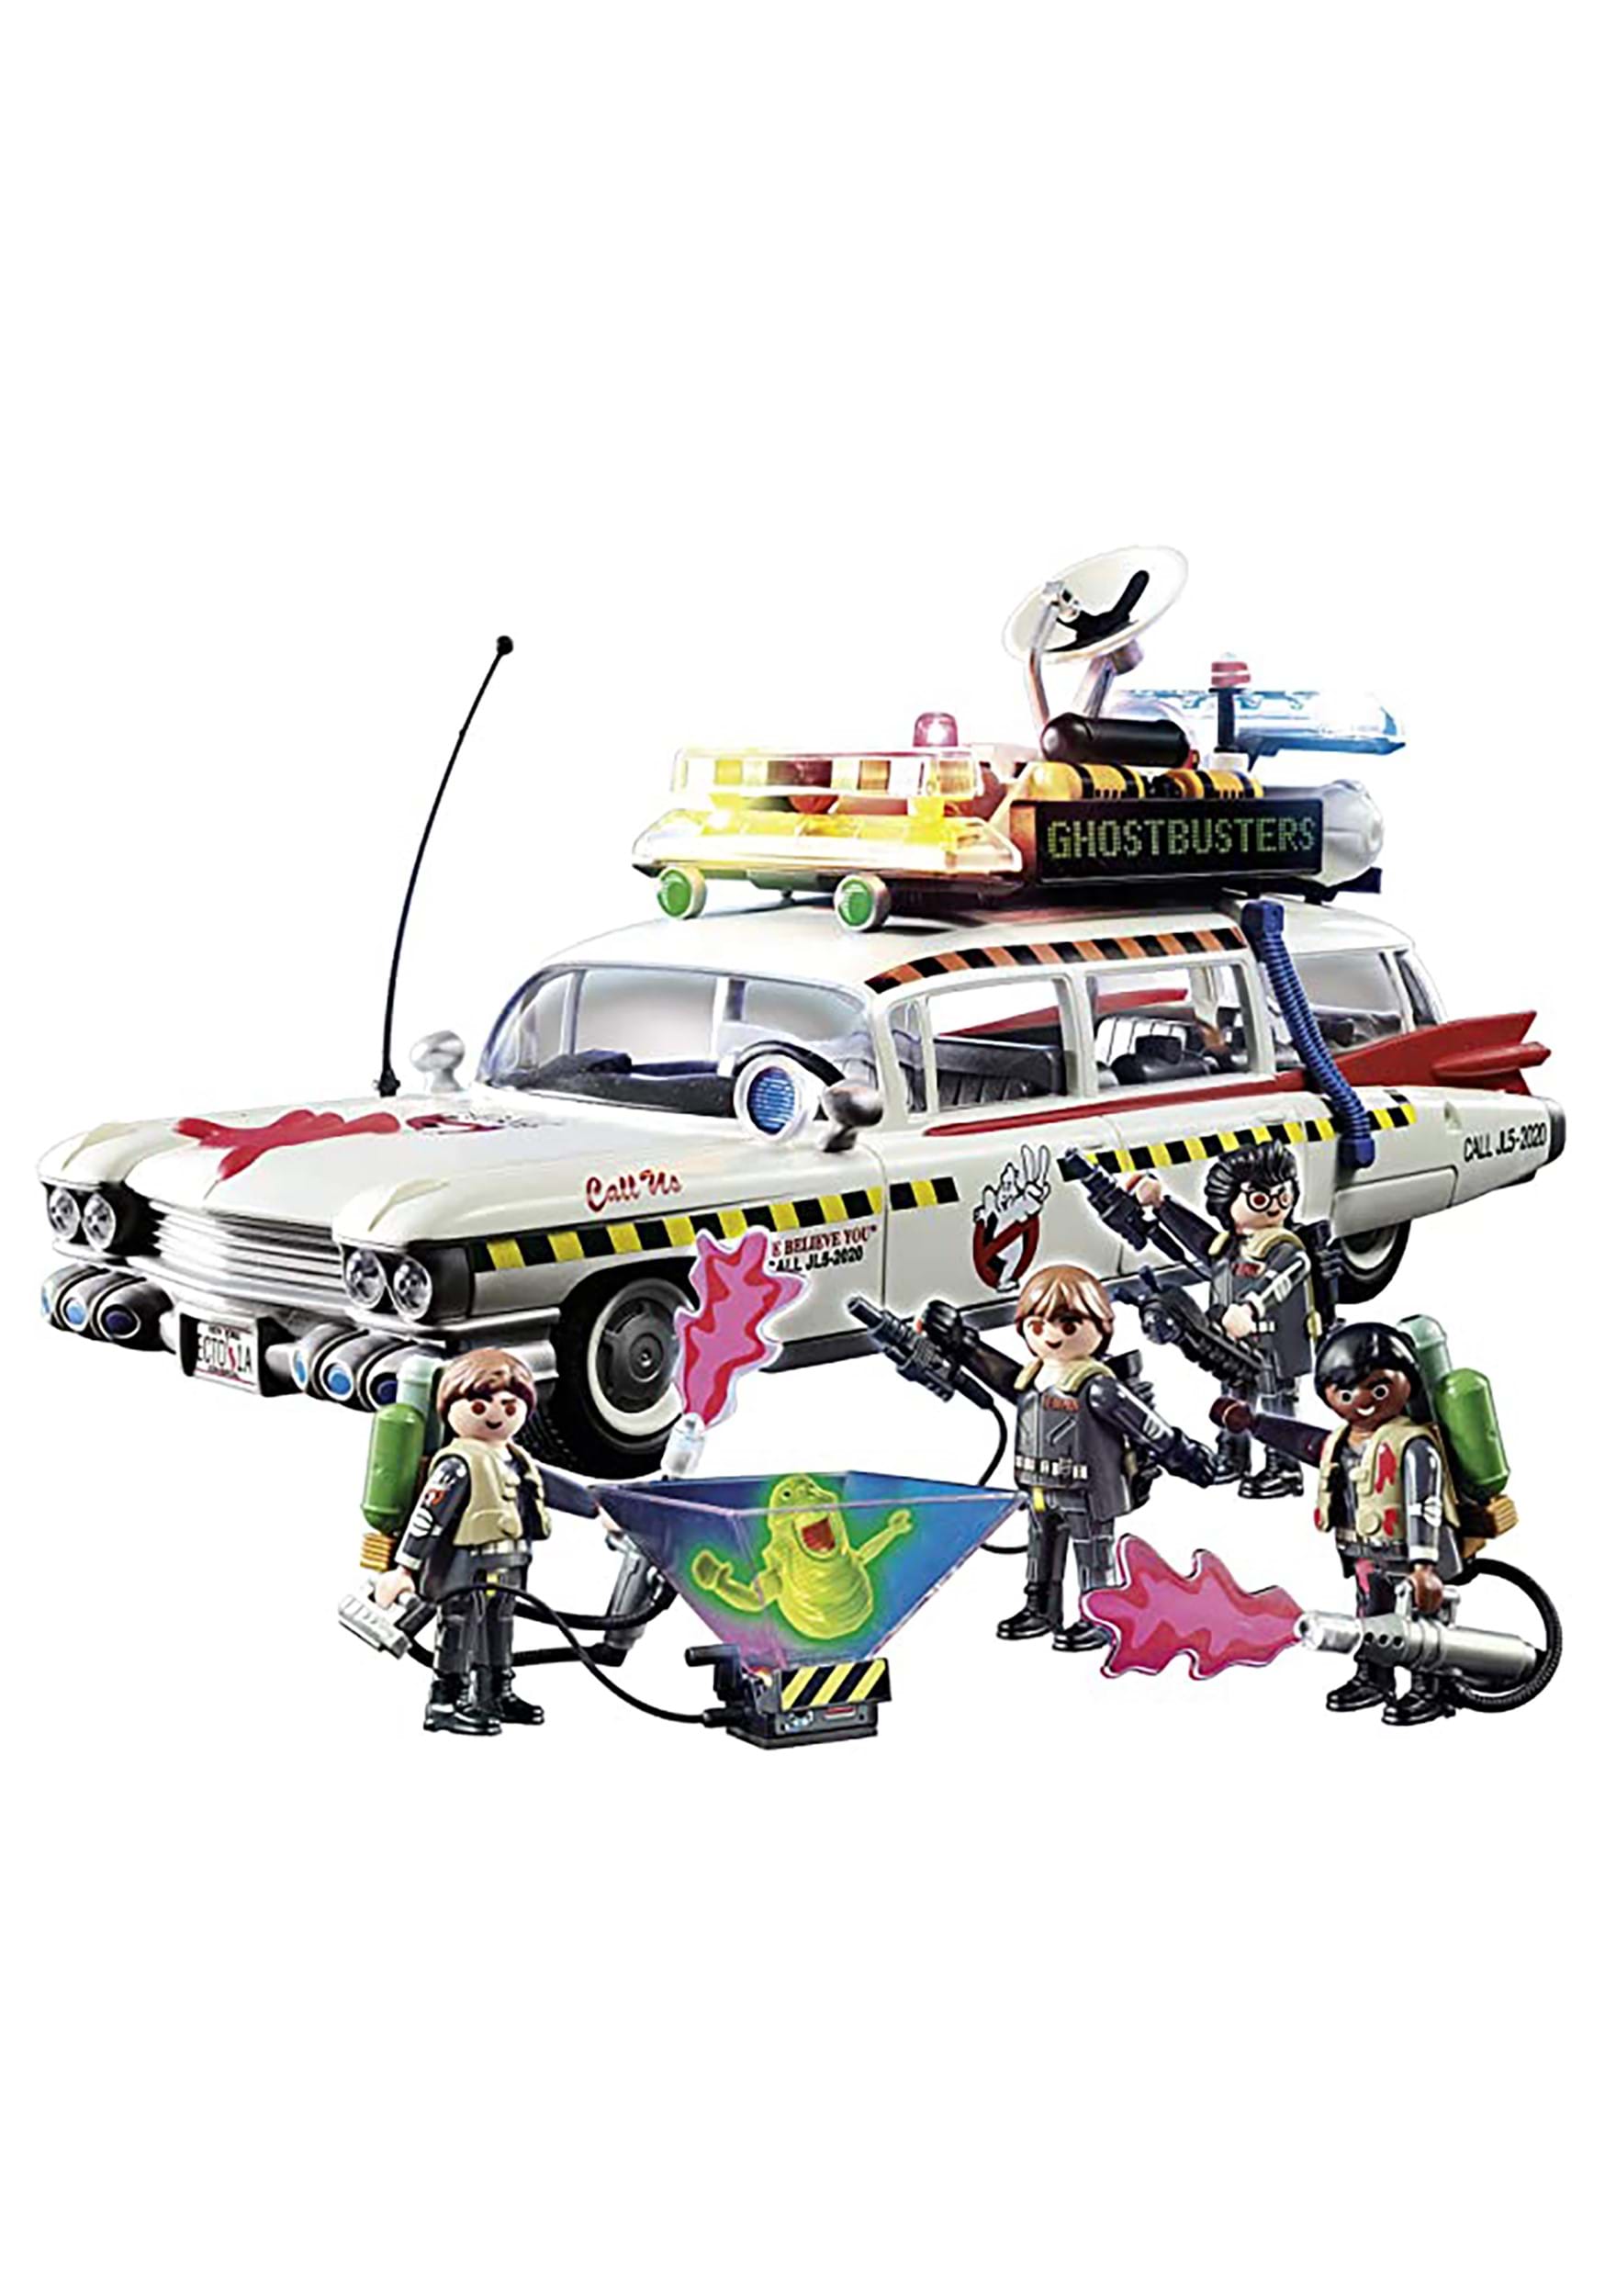 Ghostbusters Ecto-1A Playmobil Vehicle